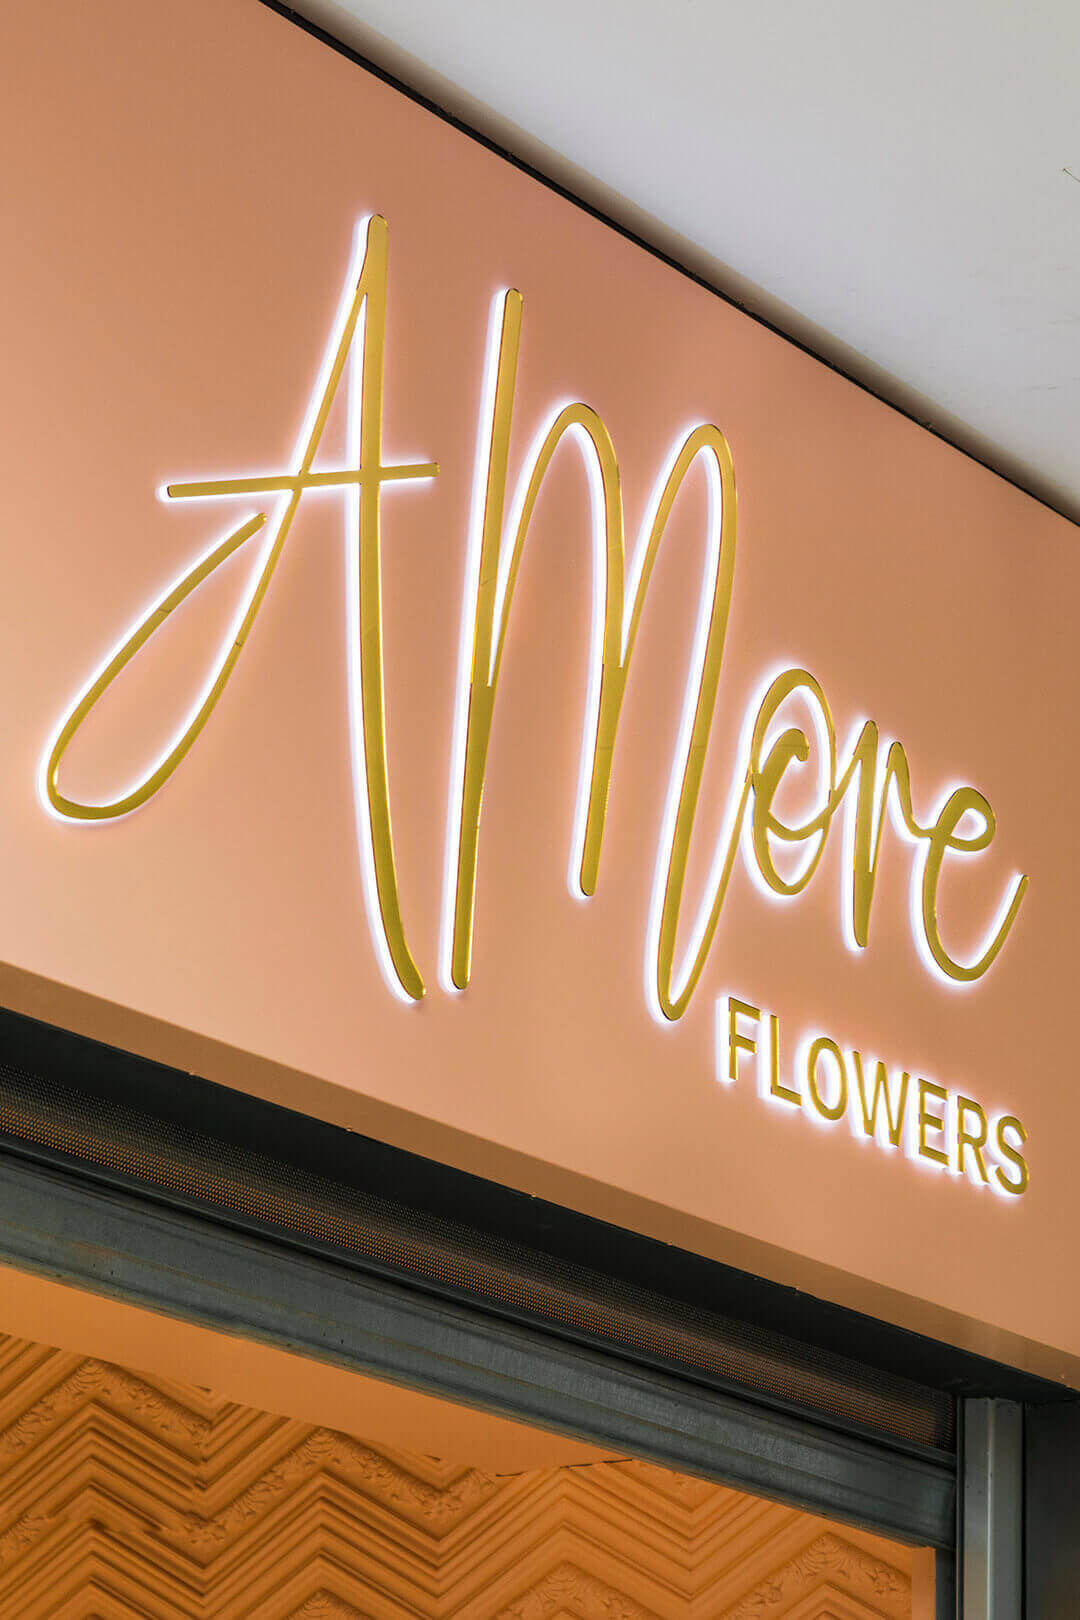 amore flower amor flave - amore-flowers-casette-gdynia-riviera-casette-gold-letters-illuminated-coffer-casette-over-store-casette-over-entry-morelowe-florist (11) 